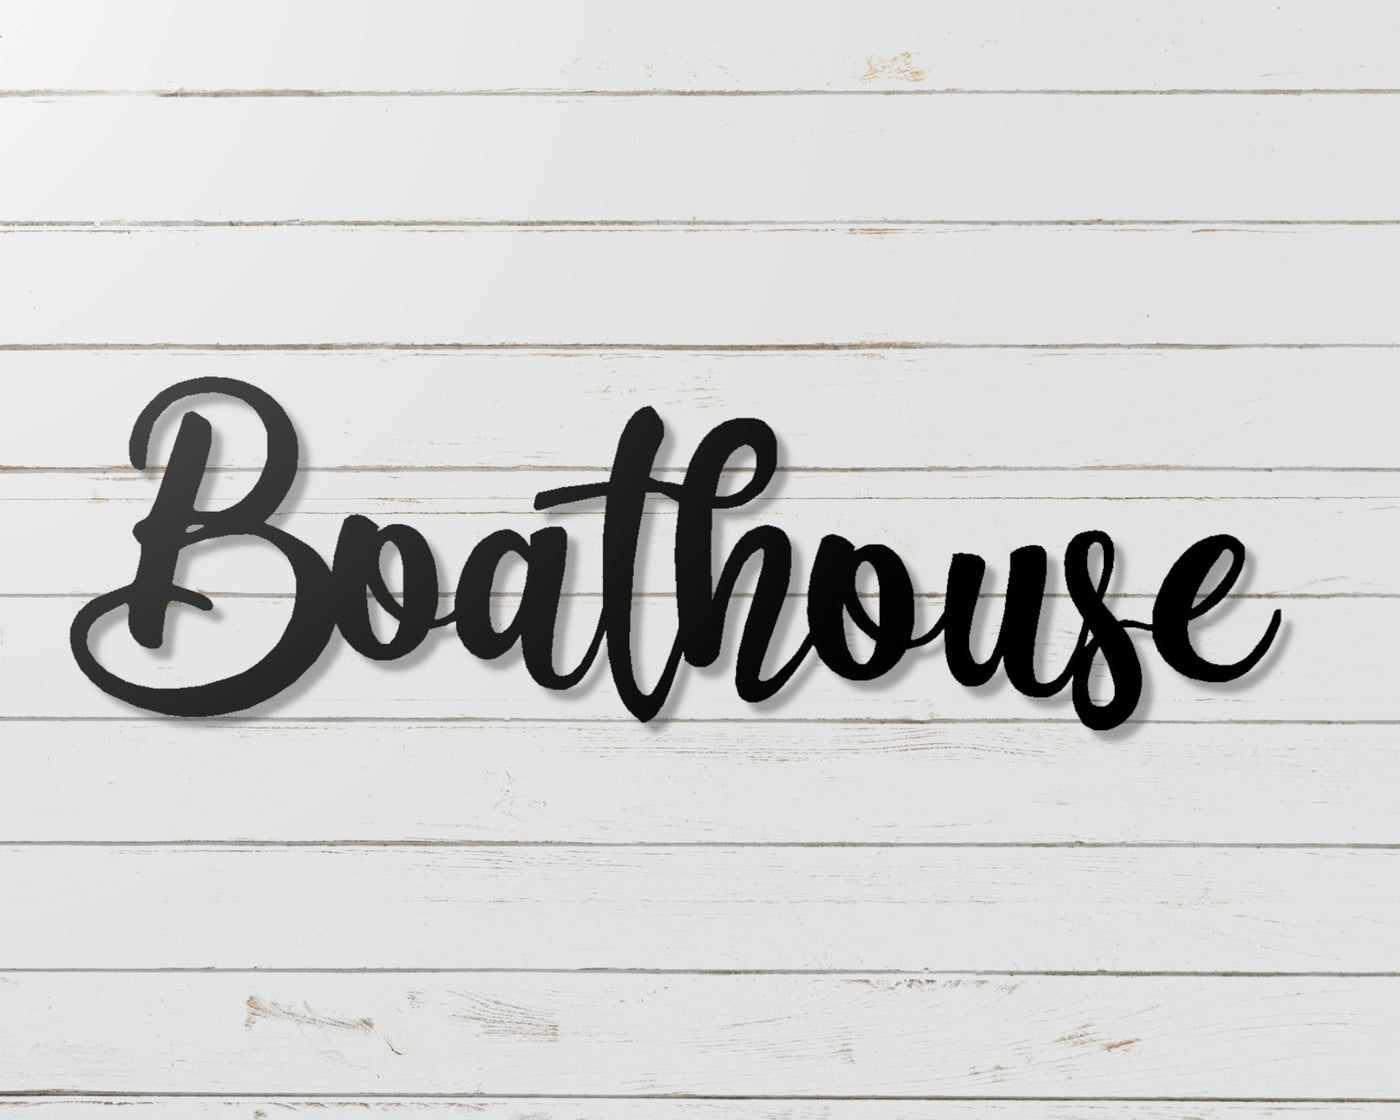 Boathouse Metal Word Sign - Madison Iron and Wood - Metal Word Art - metal outdoor decor - Steel deocrations - american made products - veteran owned business products - fencing decorations - fencing supplies - custom wall decorations - personalized wall signs - steel - decorative post caps - steel post caps - metal post caps - brackets - structural brackets - home improvement - easter - easter decorations - easter gift - easter yard decor